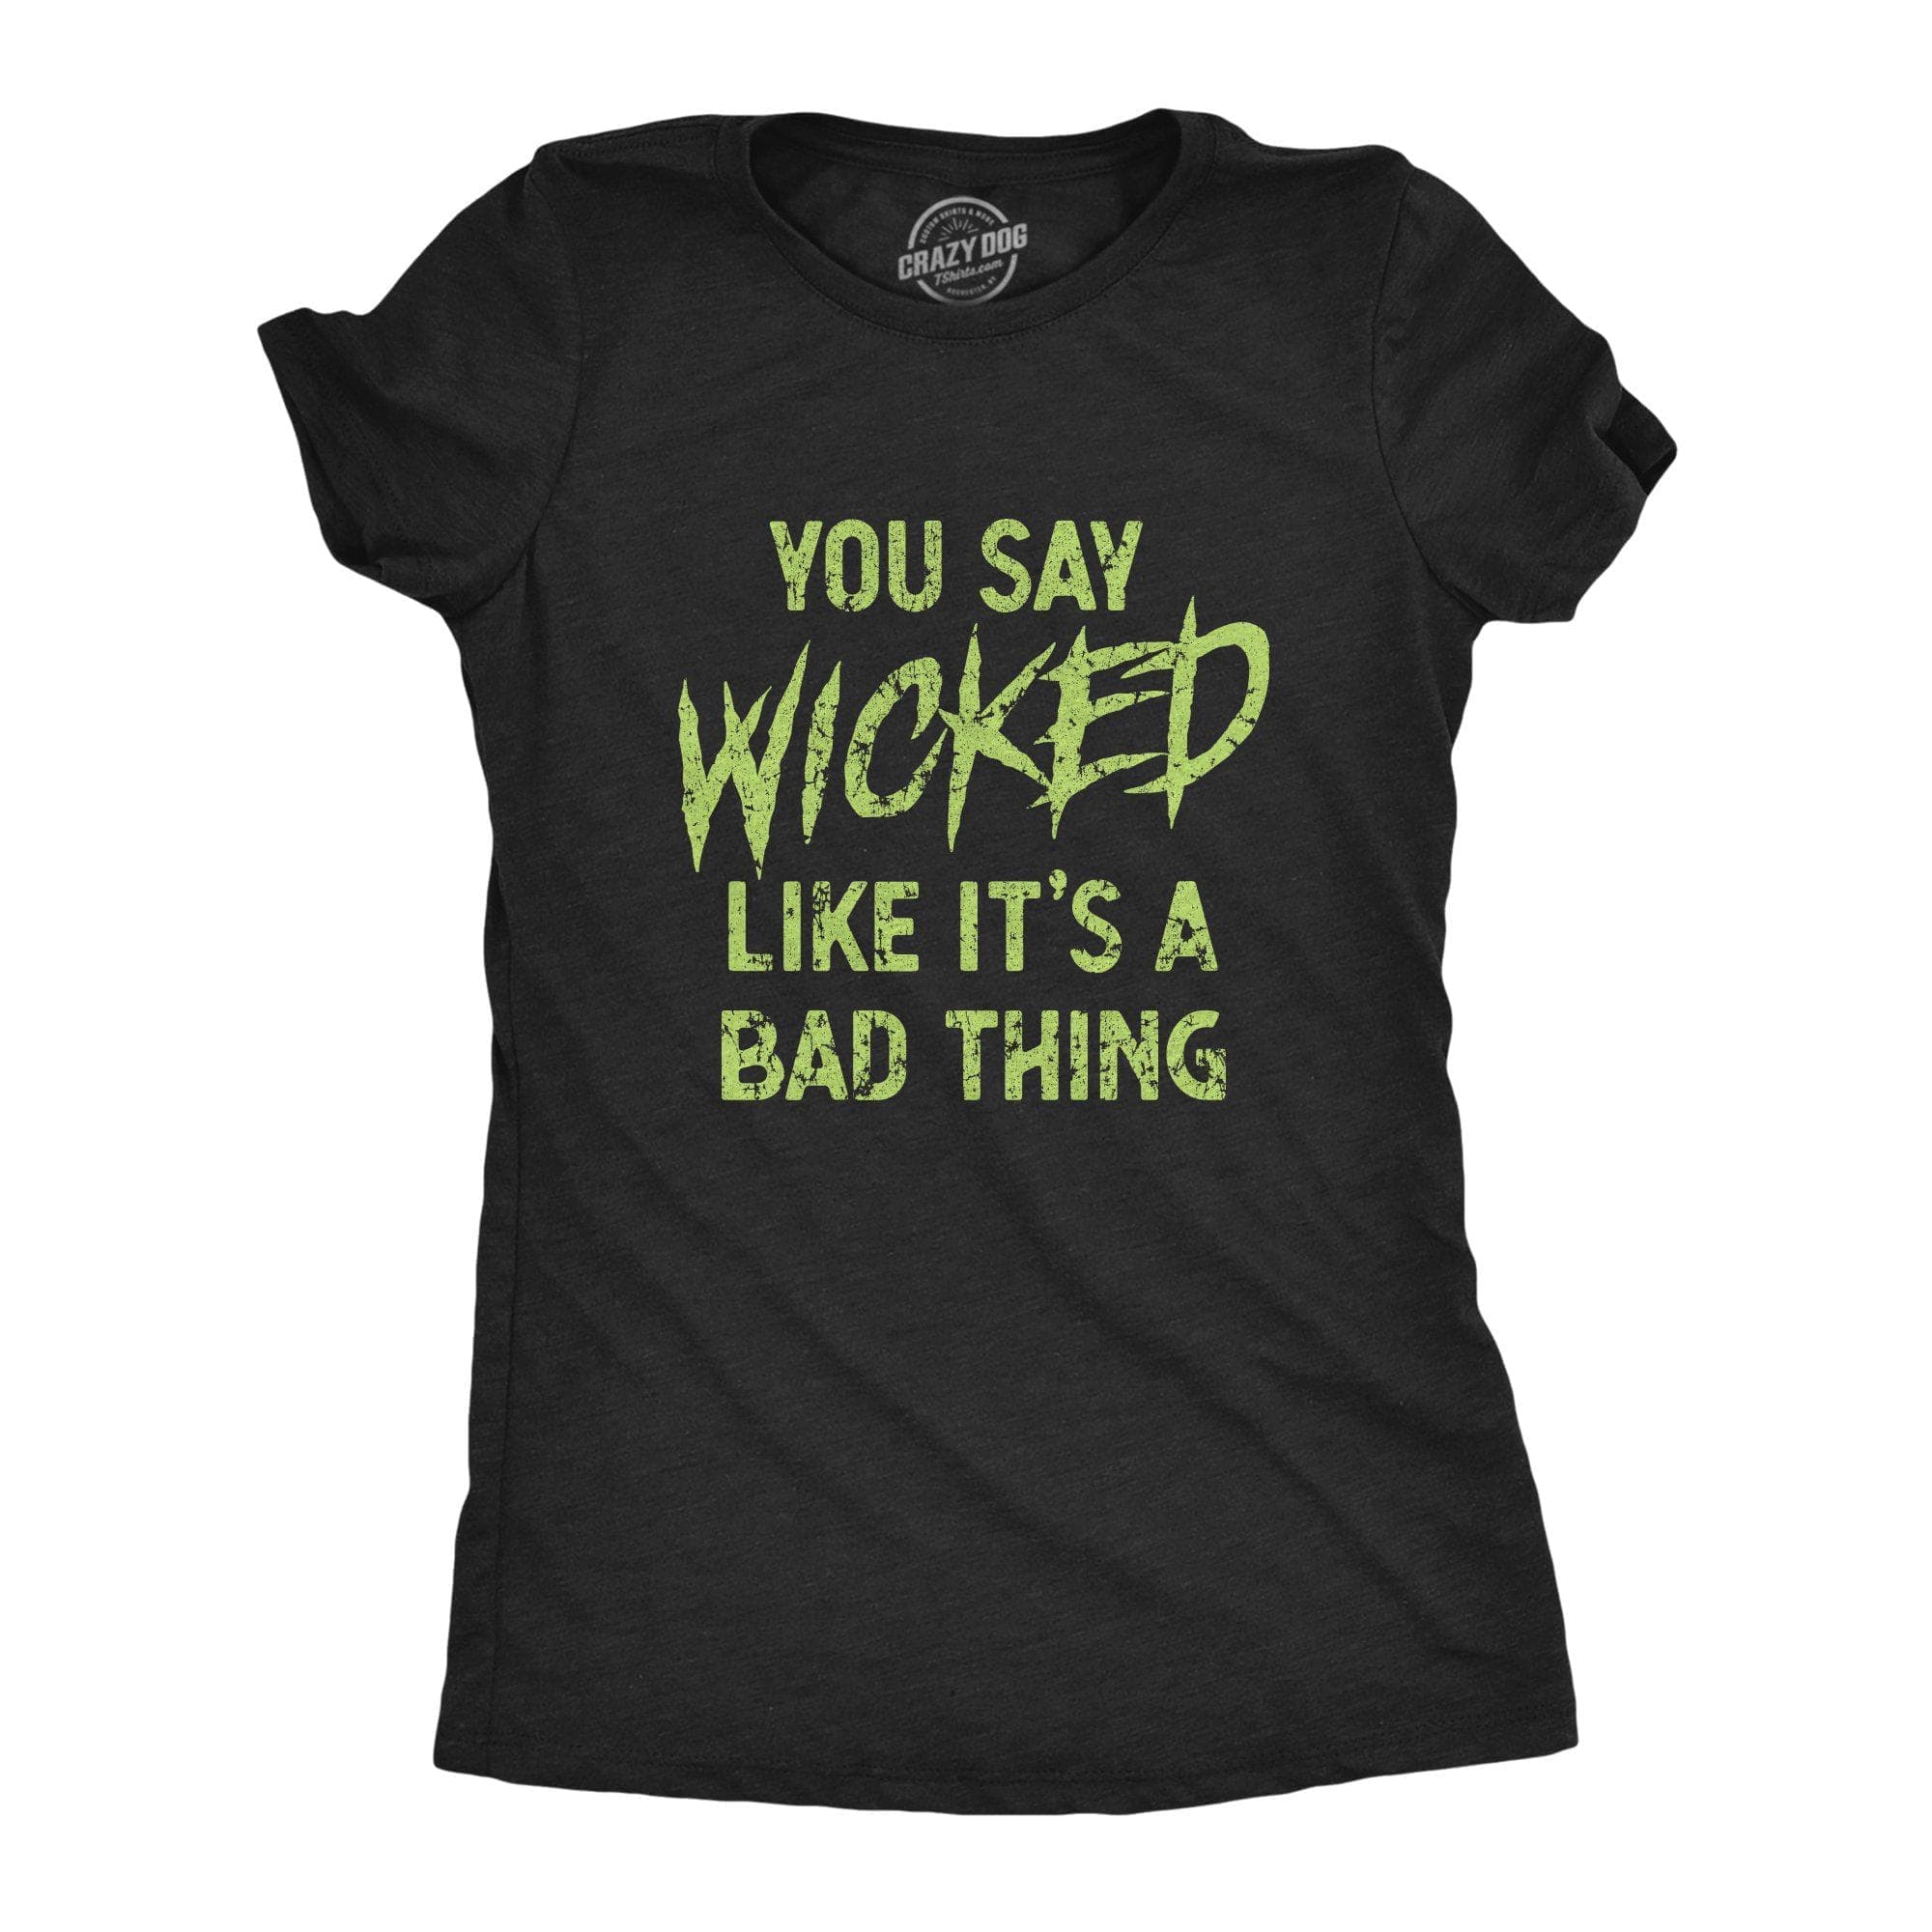 You Say Wicked Like It's A Bad Thing Women's Tshirt - Crazy Dog T-Shirts